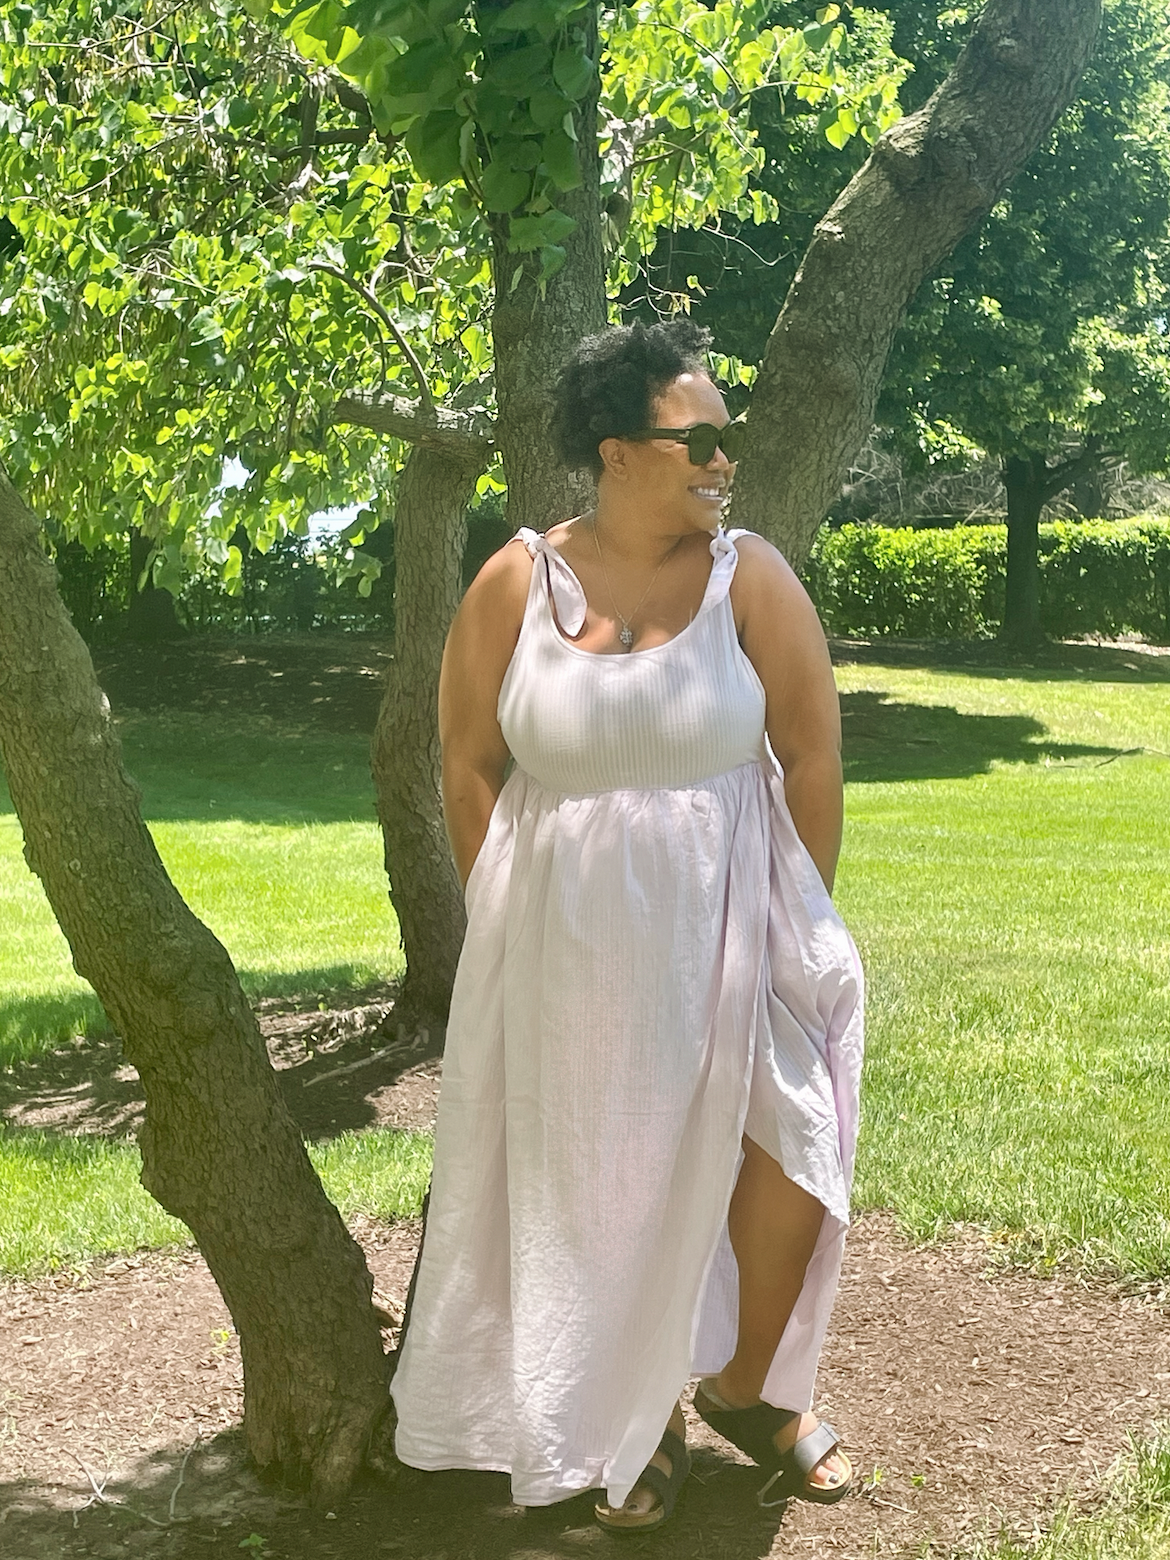 Carmen looks like an absolute goddess in this white or light pink full length sundress. She is a Black woman wearing sunglasses with medium-short curly black hair. Carmen is wearing Birkenstocks and smiling in front of a grove of trees.